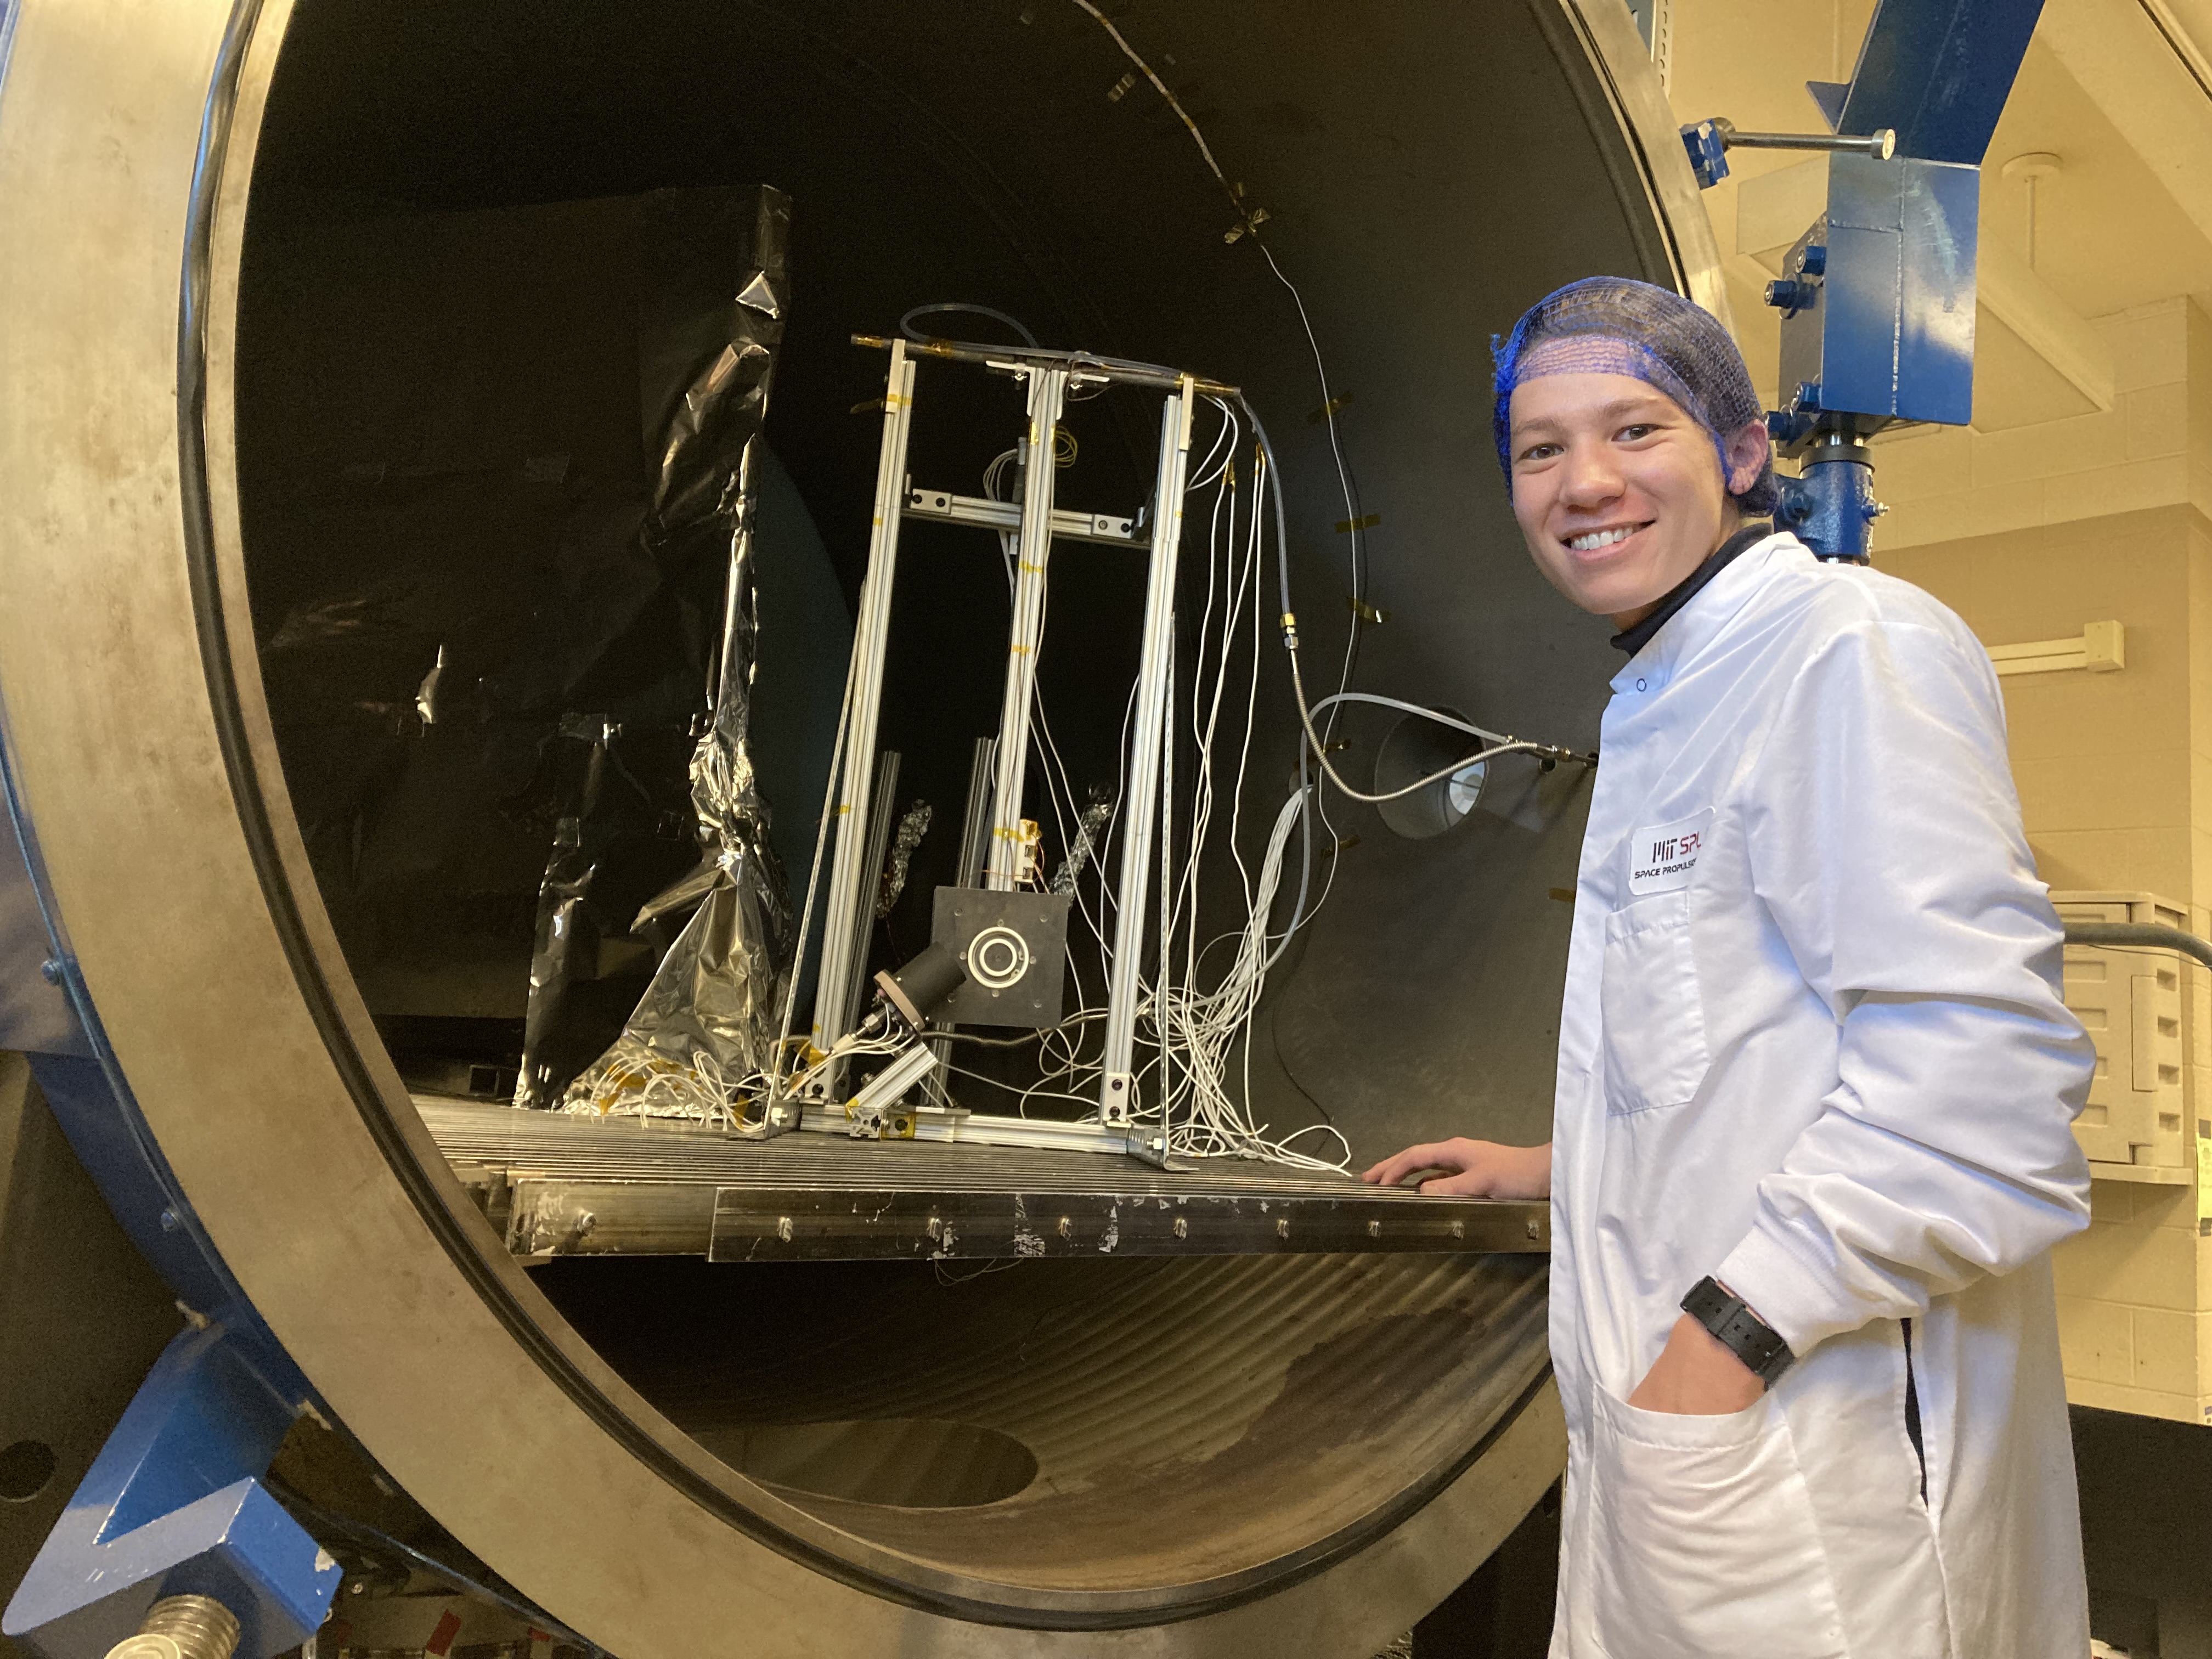 Braden Oh '23 poses with an ion thruster at MIT's Space Propulsion Lab in 2023.